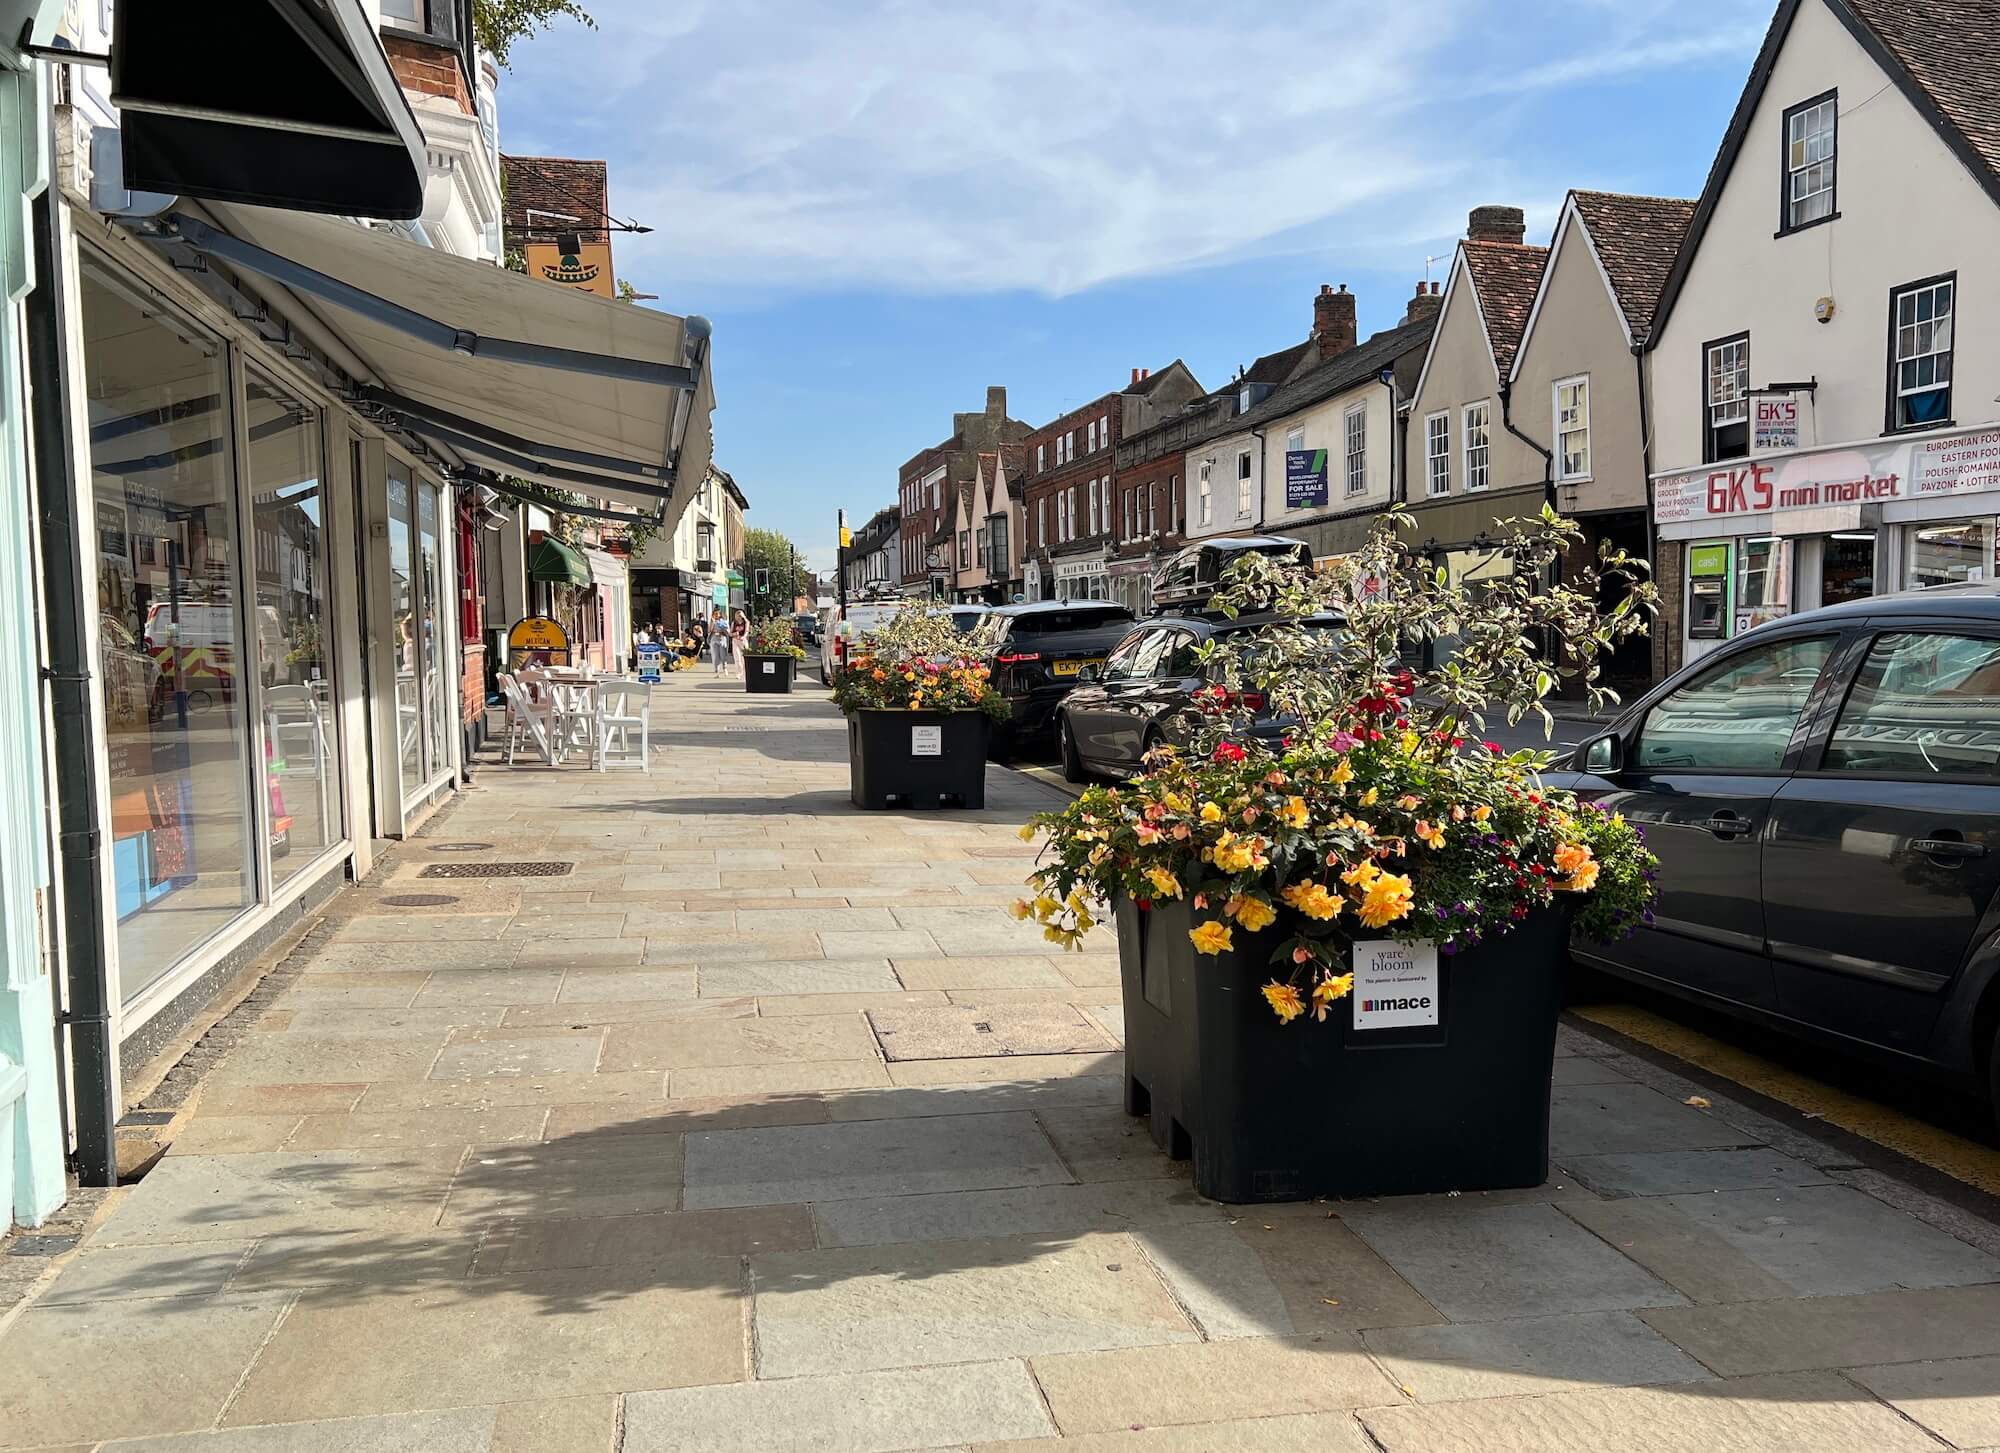 Ware in Bloom logos down the high street